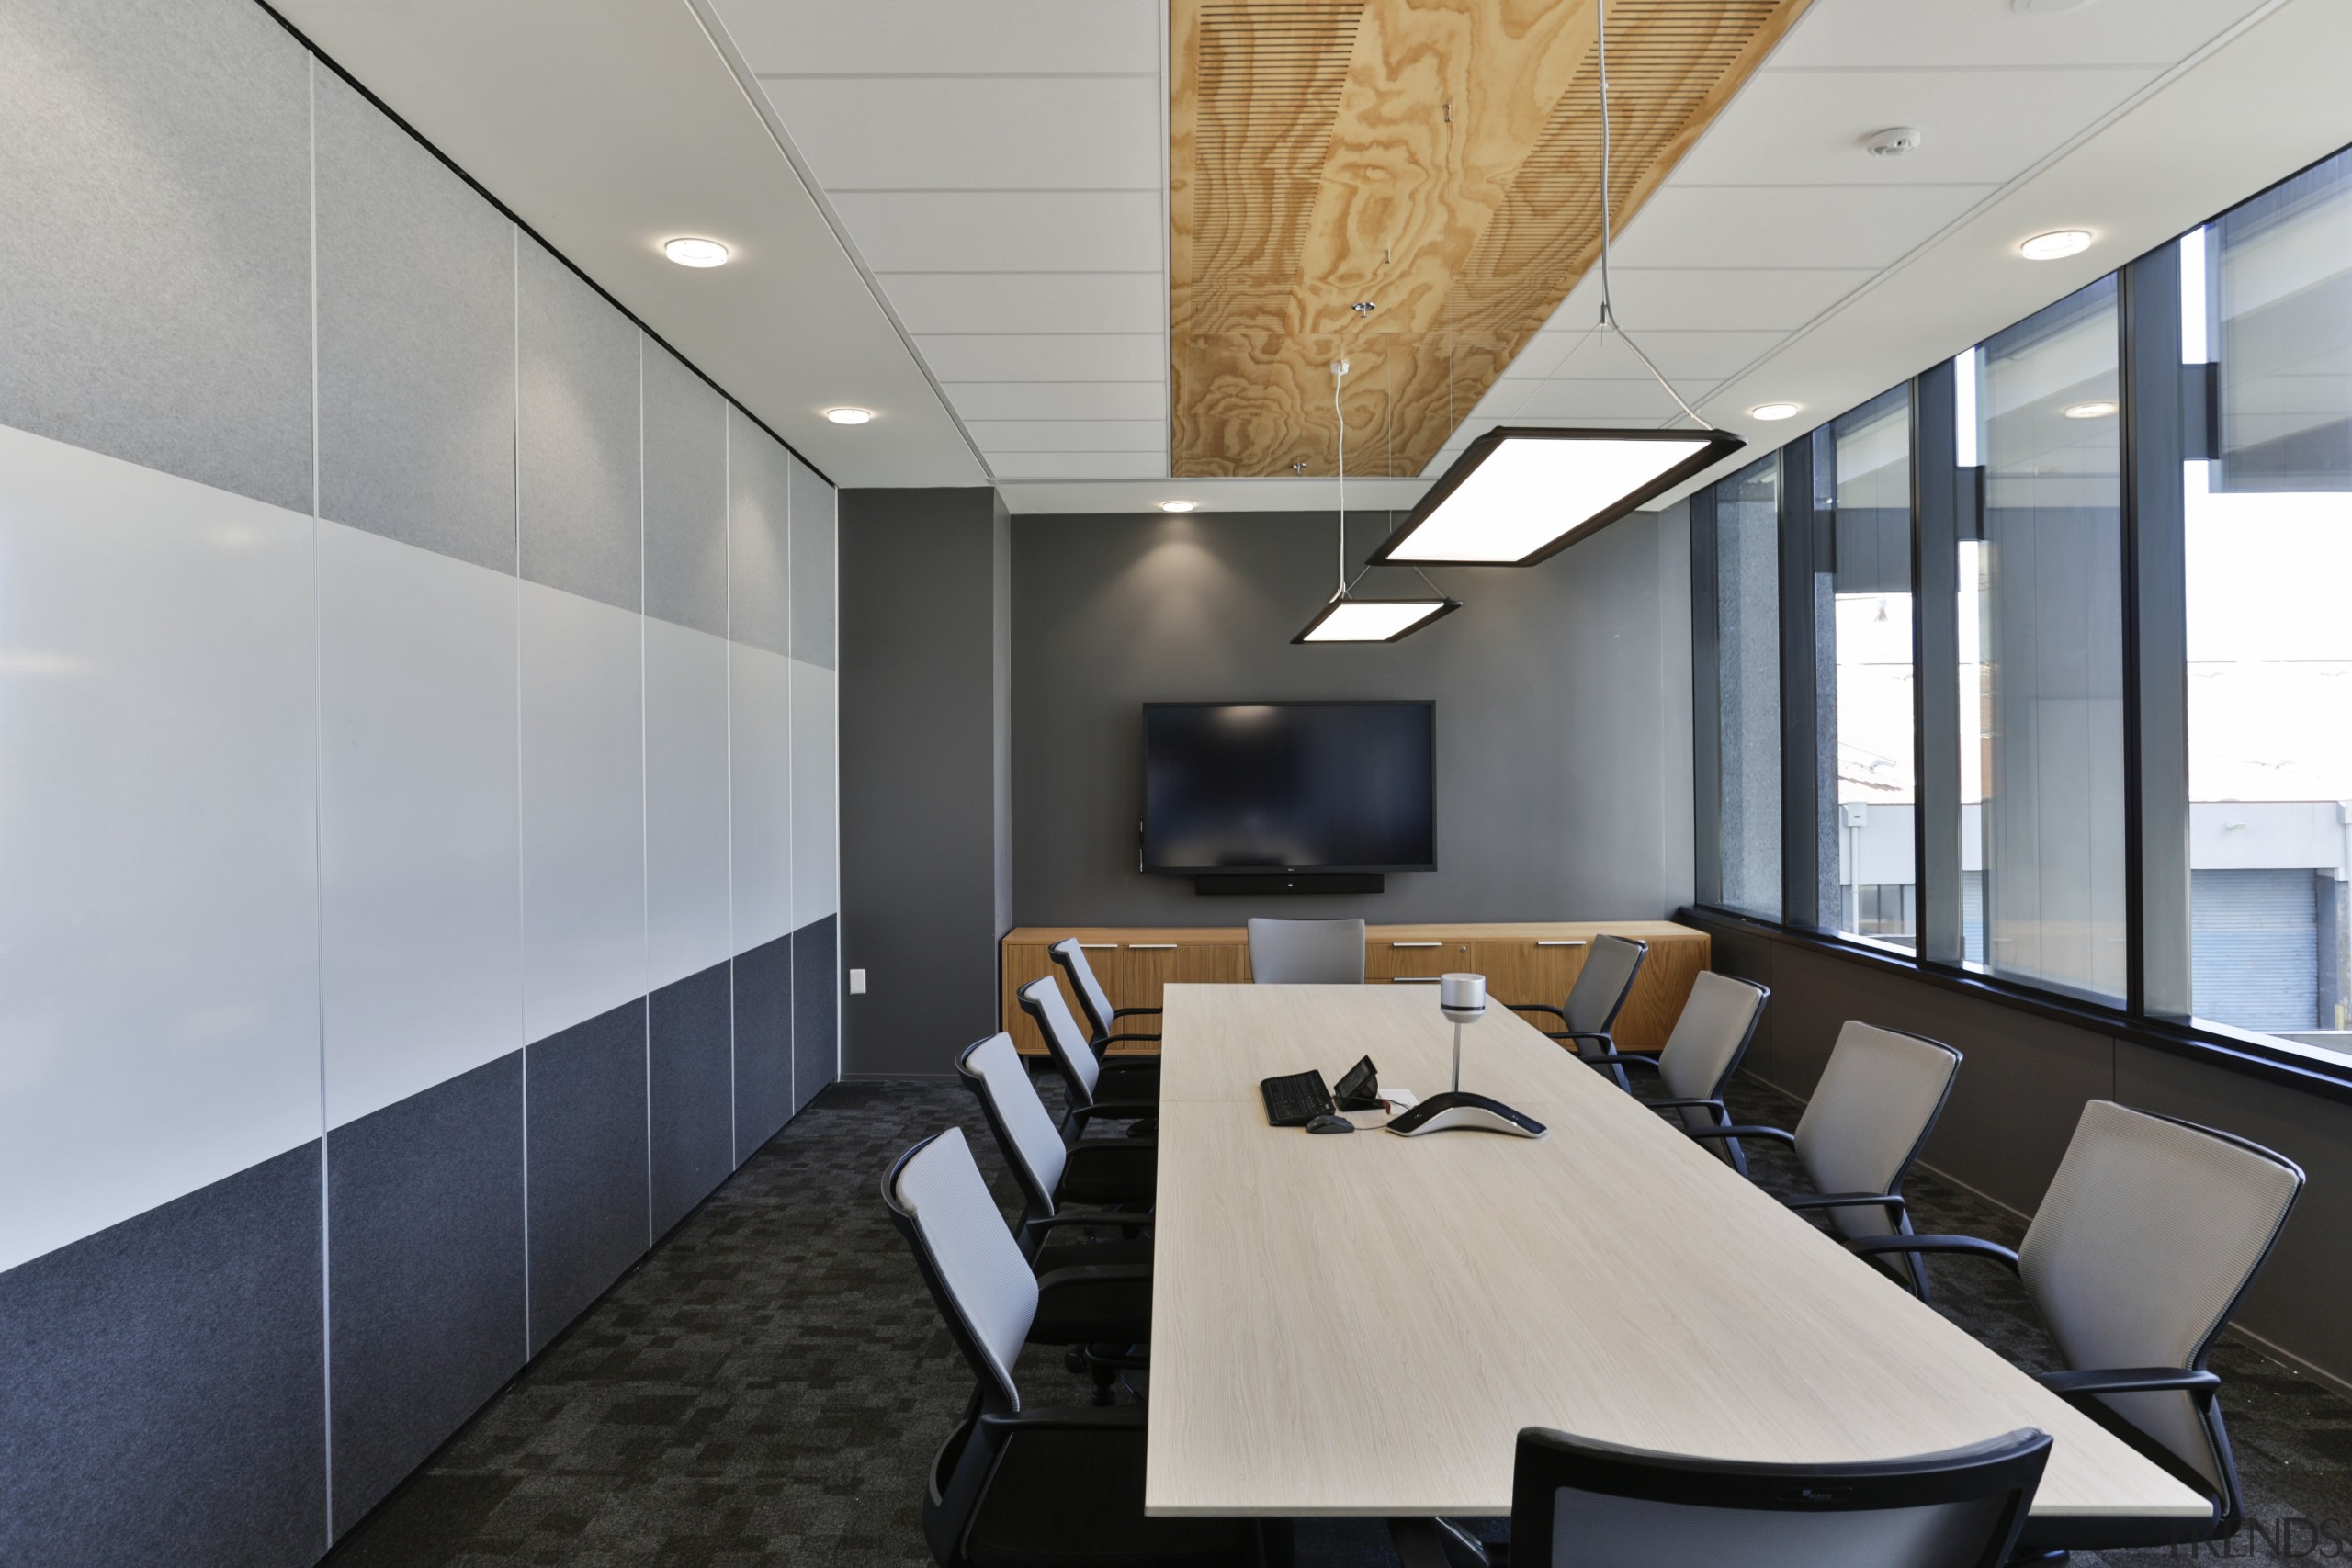 A meeting room in the new Datacom building architecture, ceiling, conference hall, interior design, office, gray